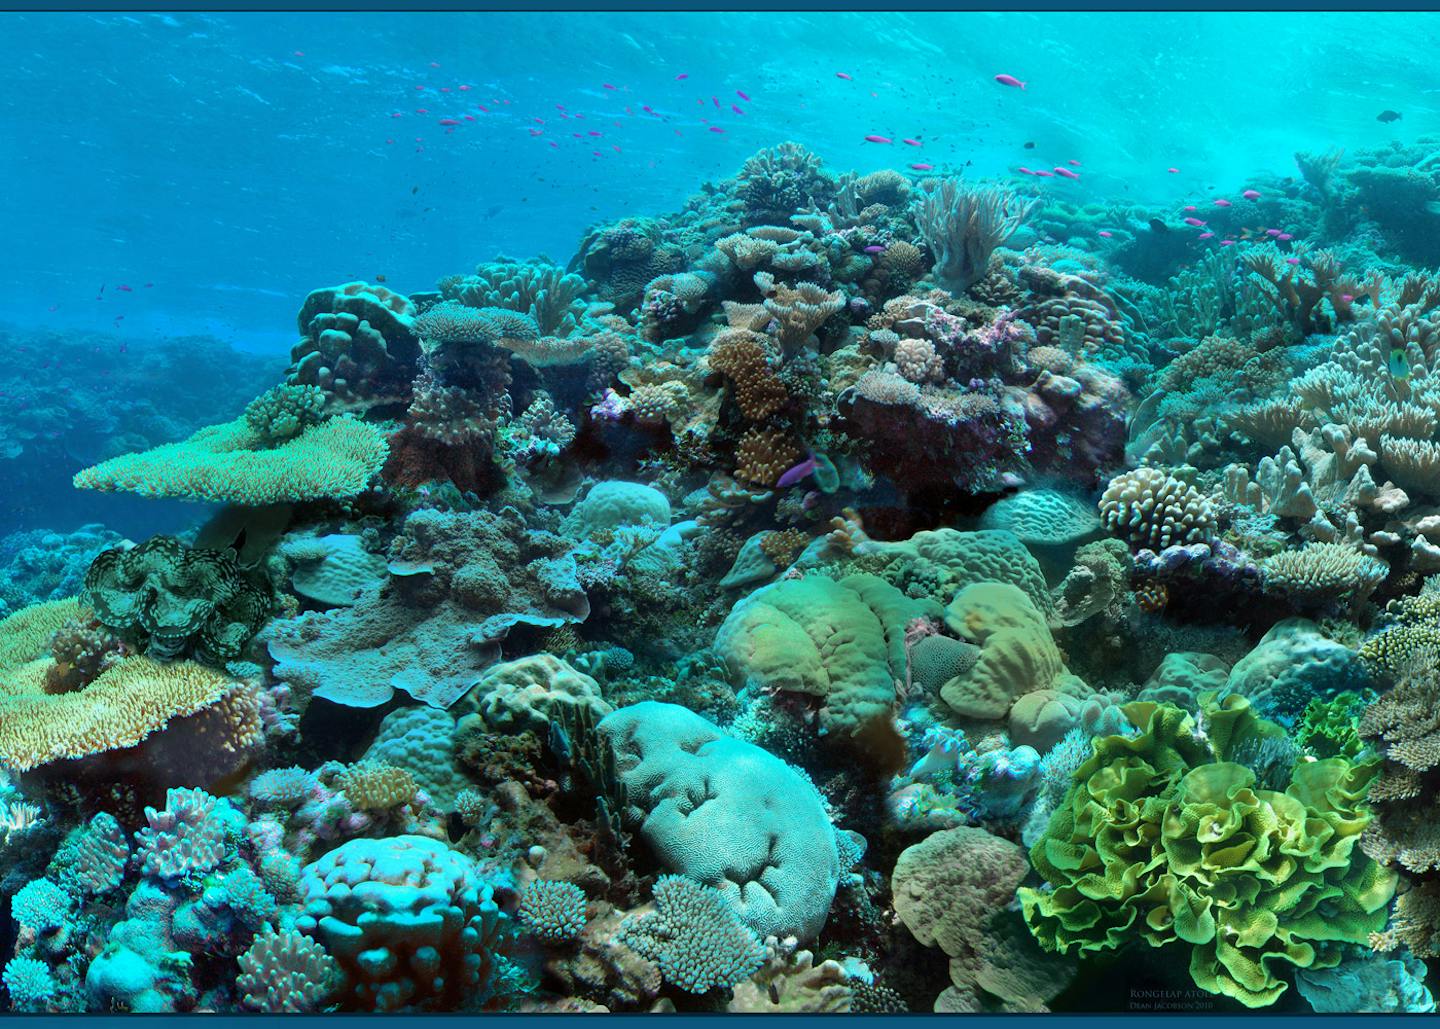 How Belize saved its coral reefs